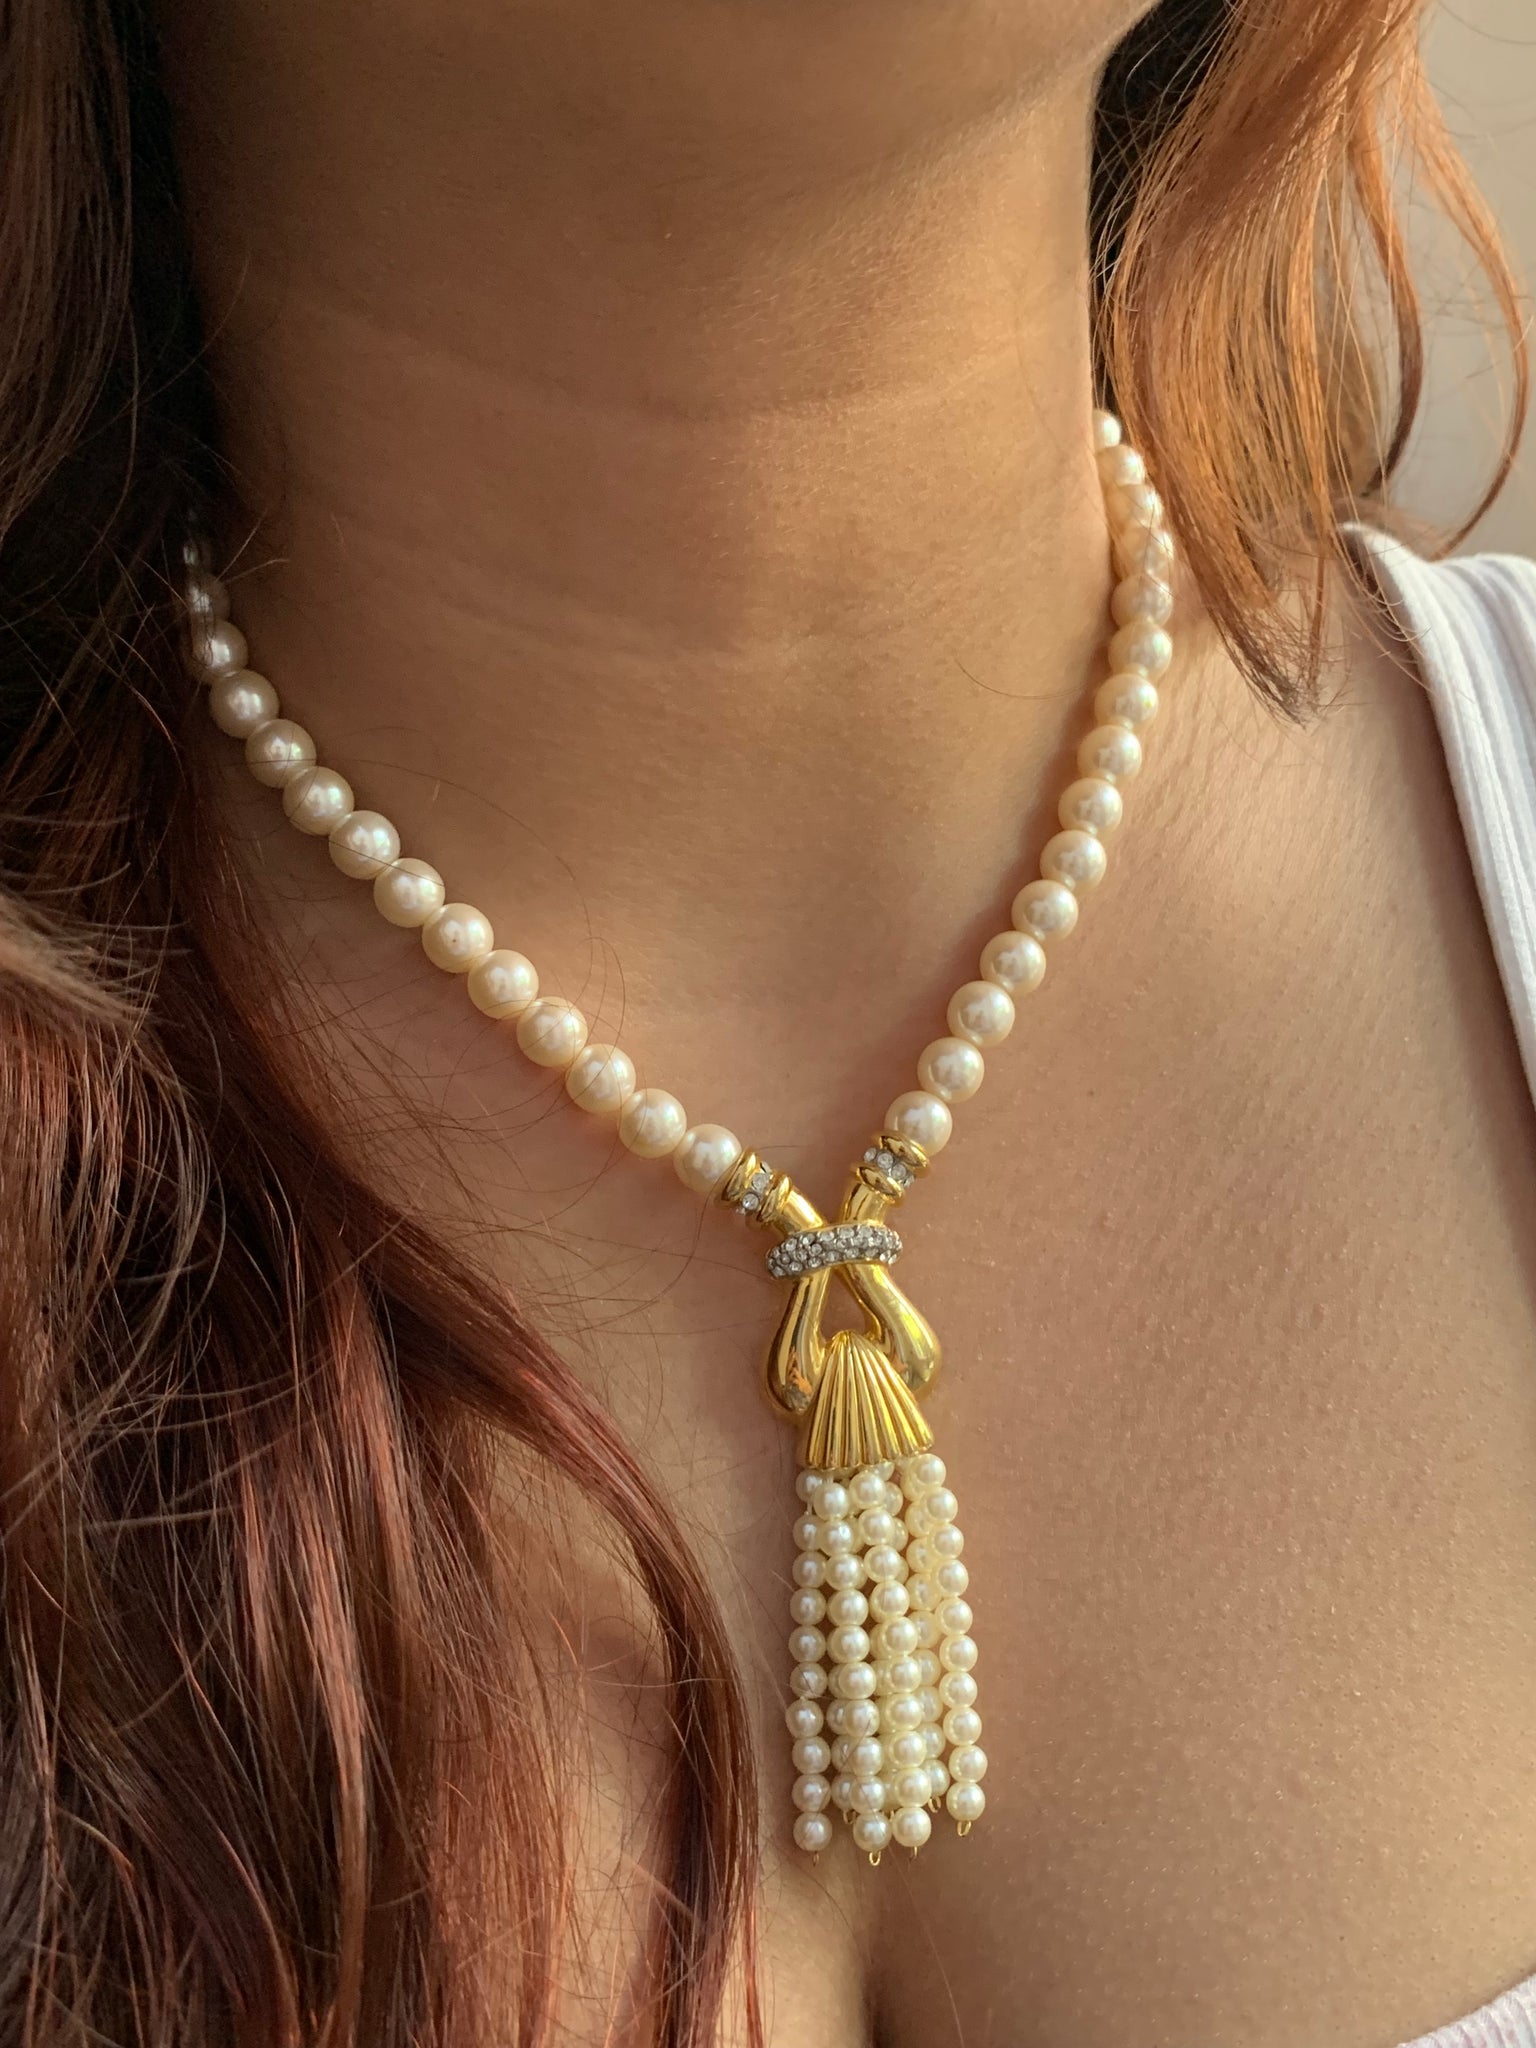 Vintage Costume Faux Pearl Necklace with Floral Rhinestone Clasp, Long Pearl  Bead Necklace, 84 cm / 33 inches. - Addy's Vintage